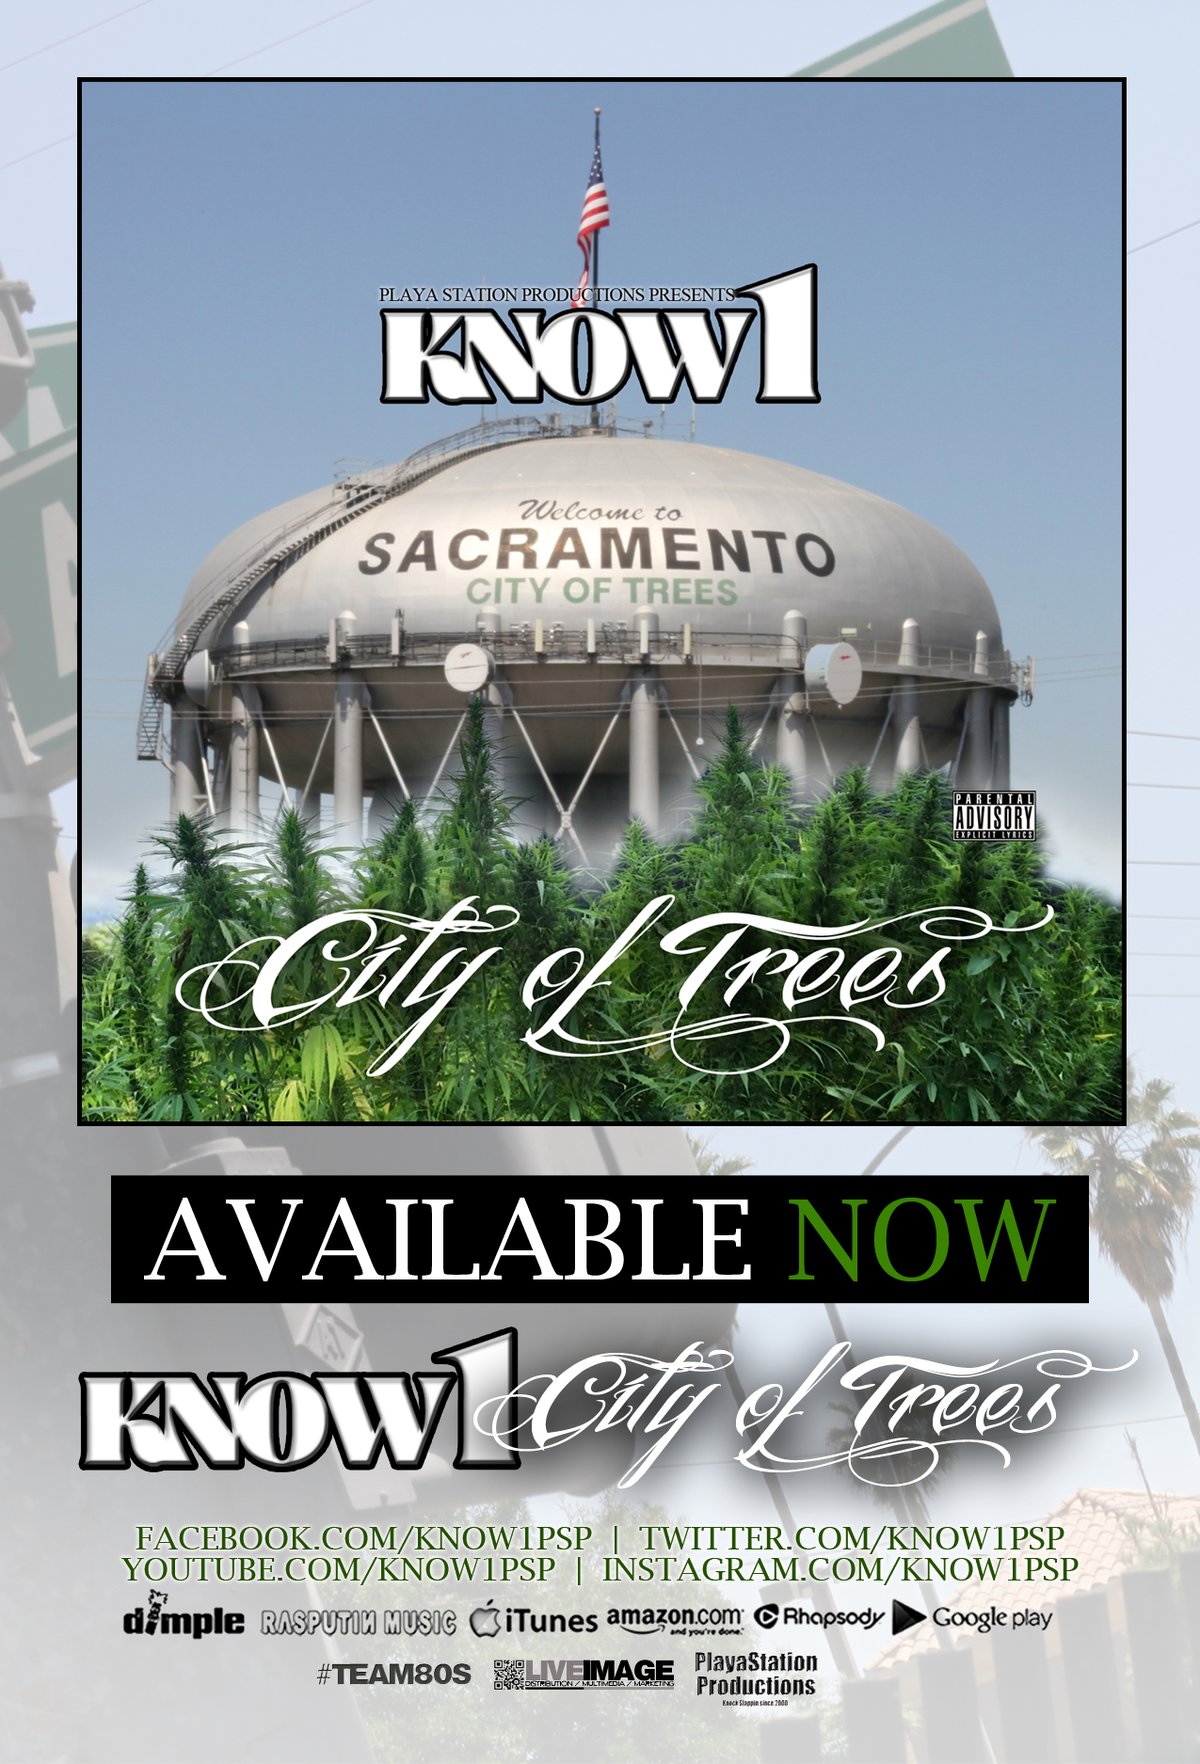 Know1-City of Trees